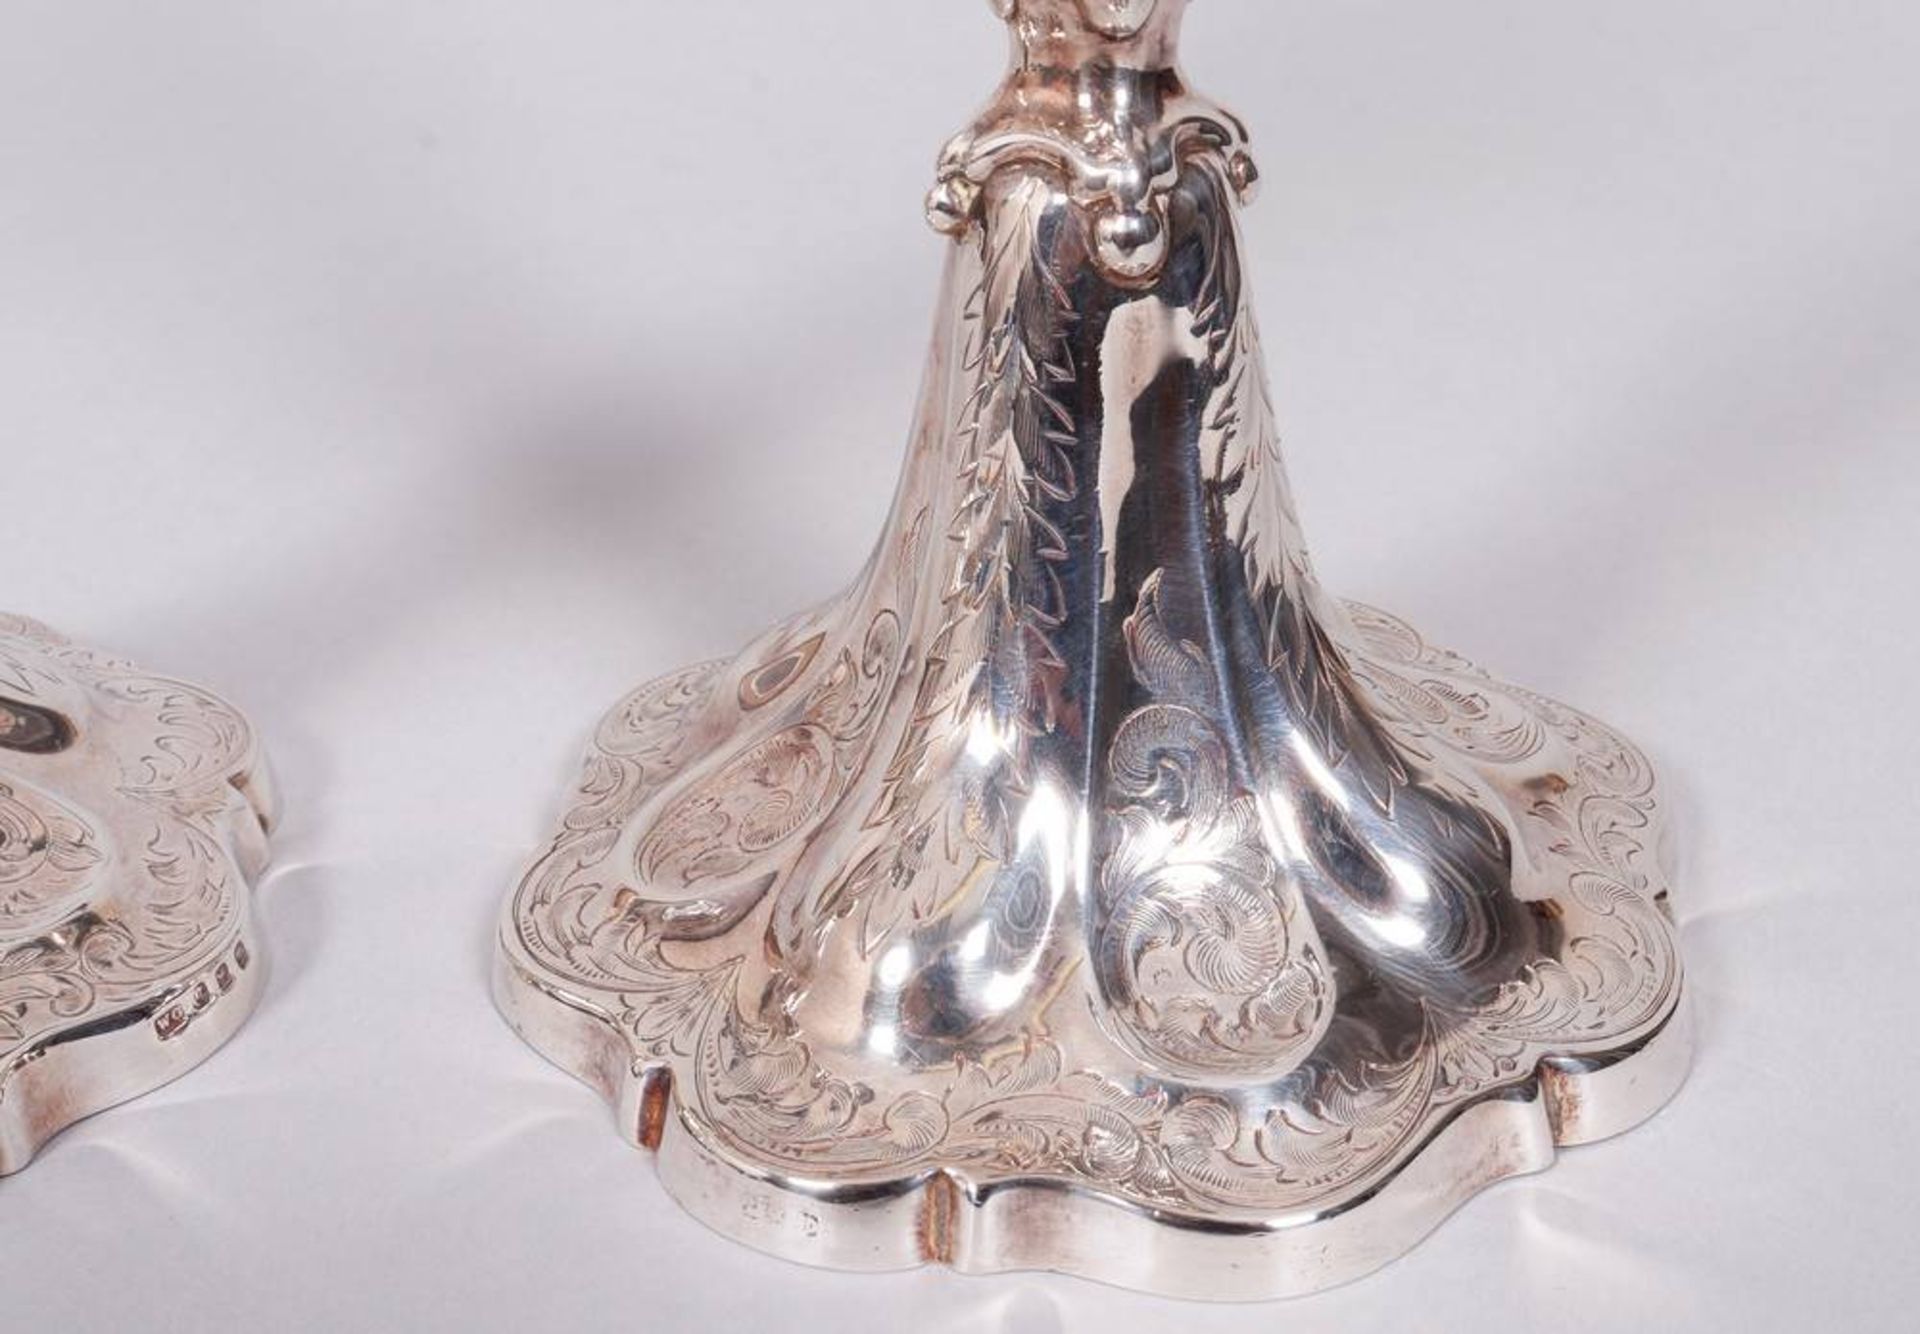 Pair of candlesticks, silver-plated, probably German, 20th C. - Image 2 of 4